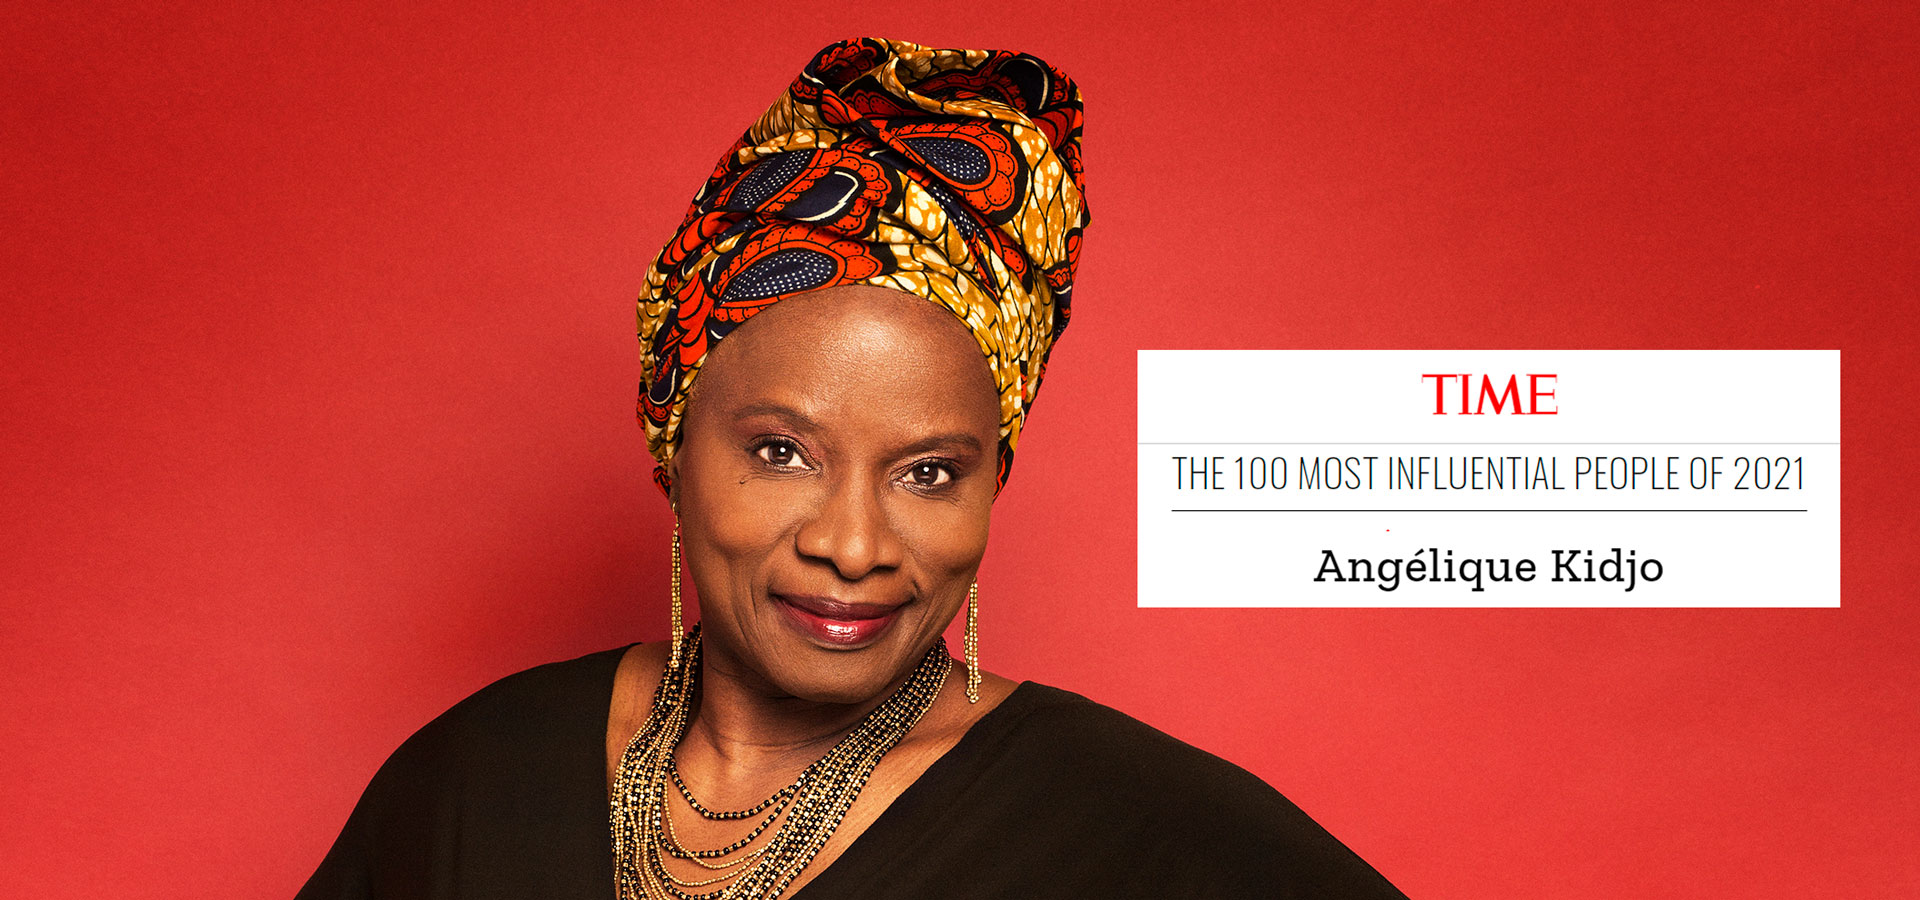 Angélique Kidjo Named one of Time magazine’s 100 Most Influential People